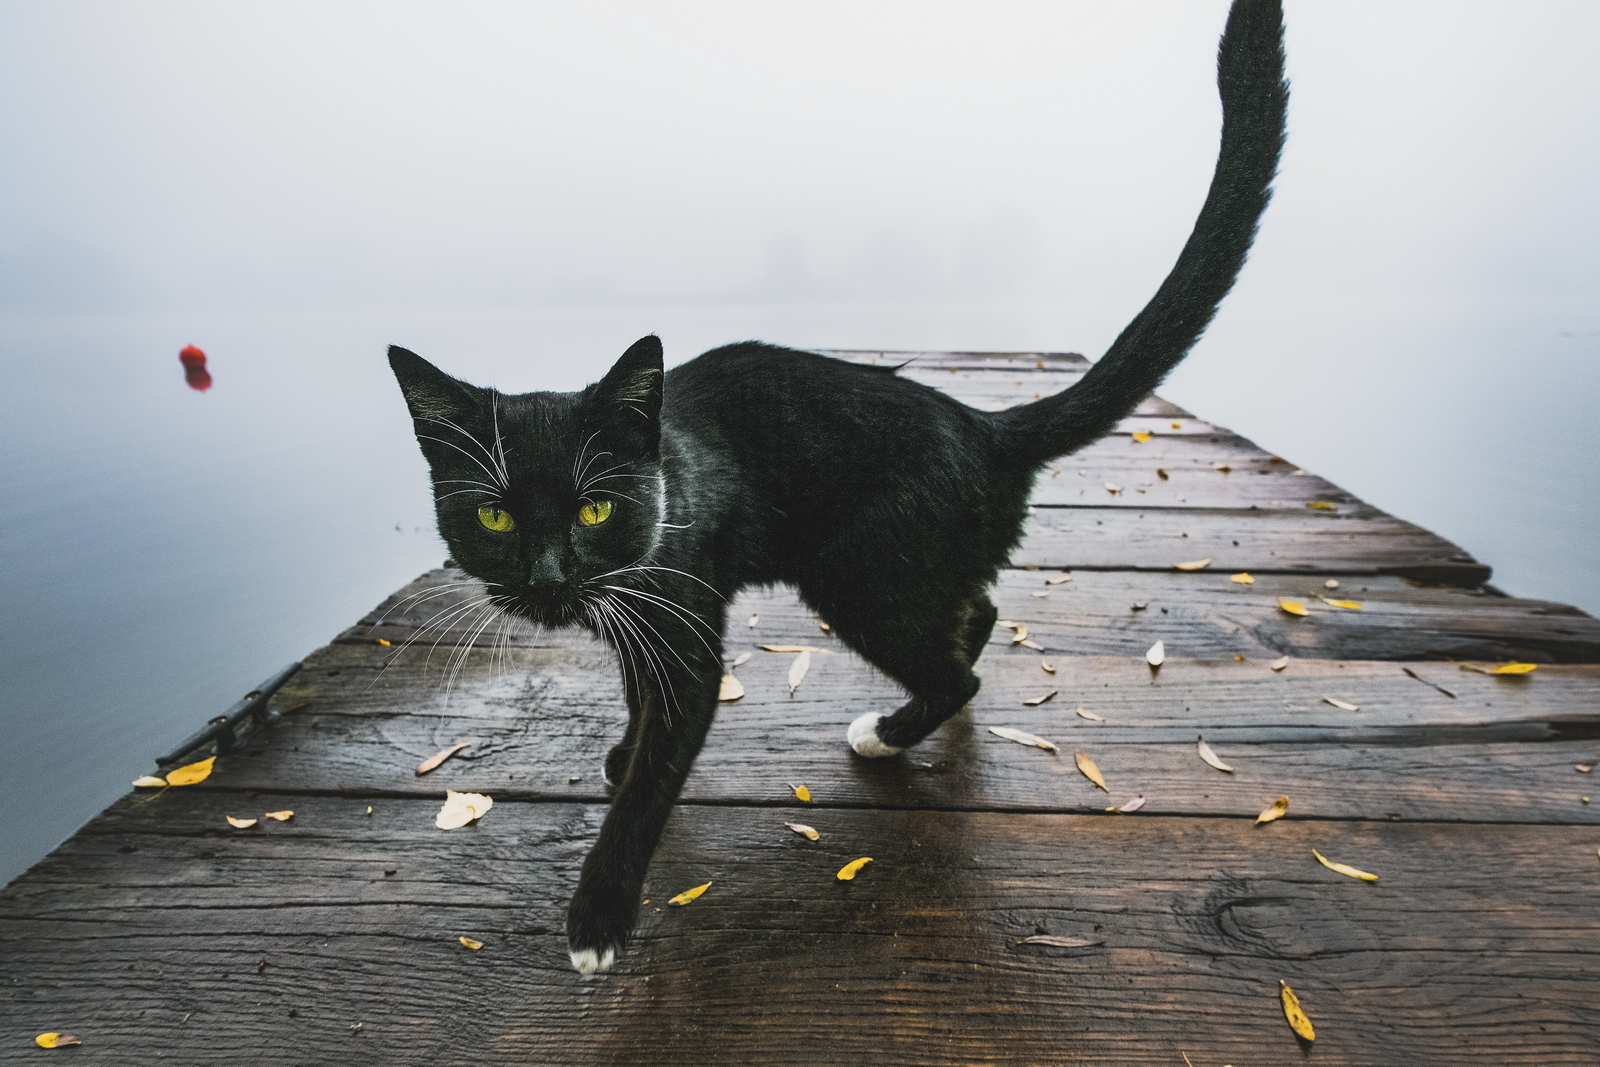 Kitty – In the misty morning on the river Oder in the gallery landscape he visited me a black stranger. Extremely nice and busy, we walked together in the back and to capture Kitty. Fuji XPro-2, XF 10-20, 1/350s, f5.6, ISO 800